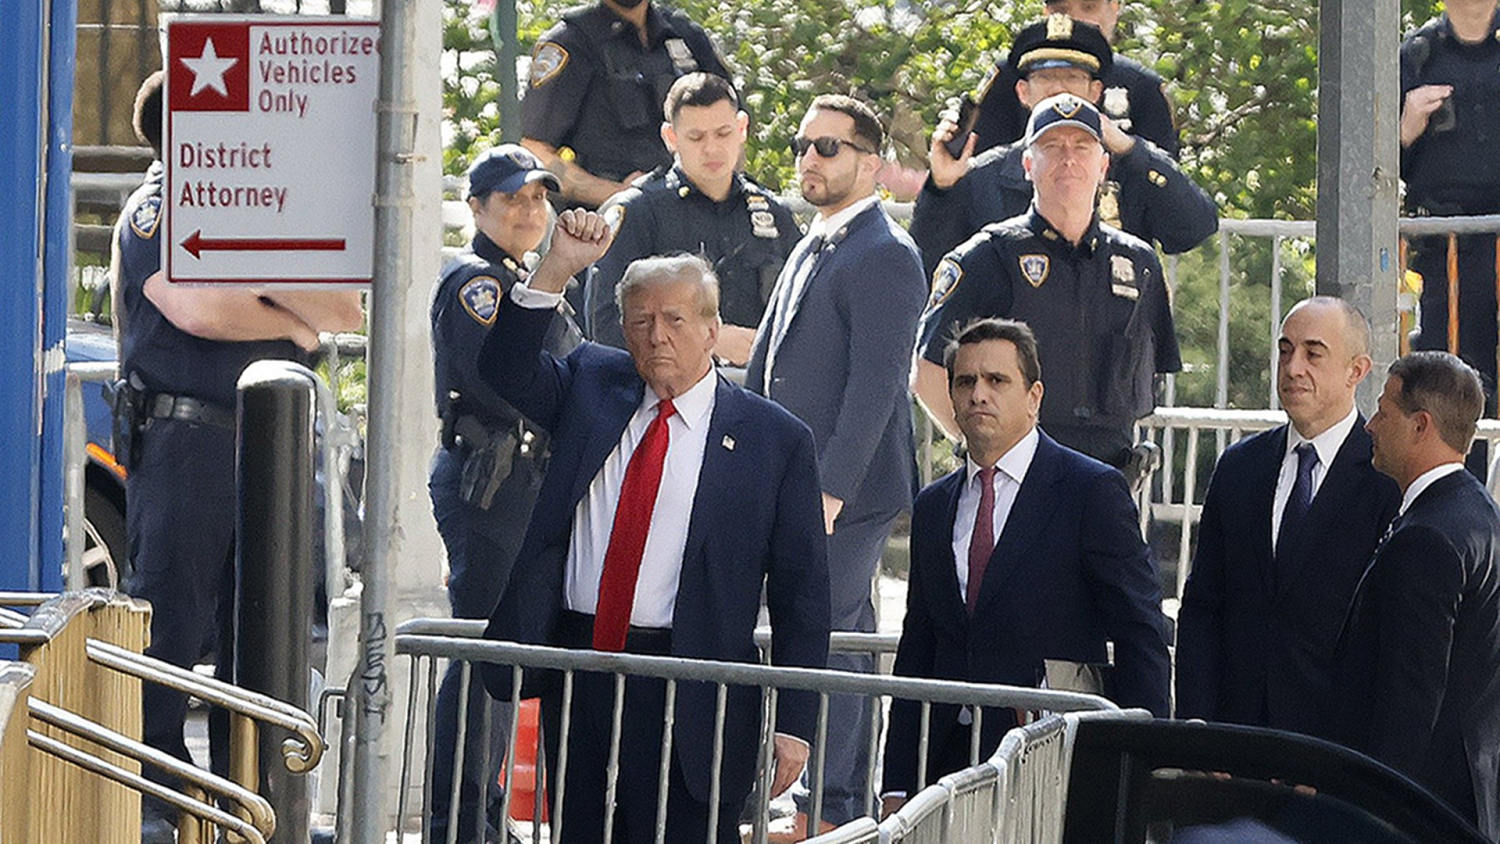 Trump arrives at NYC courthouse for hush money criminal trial